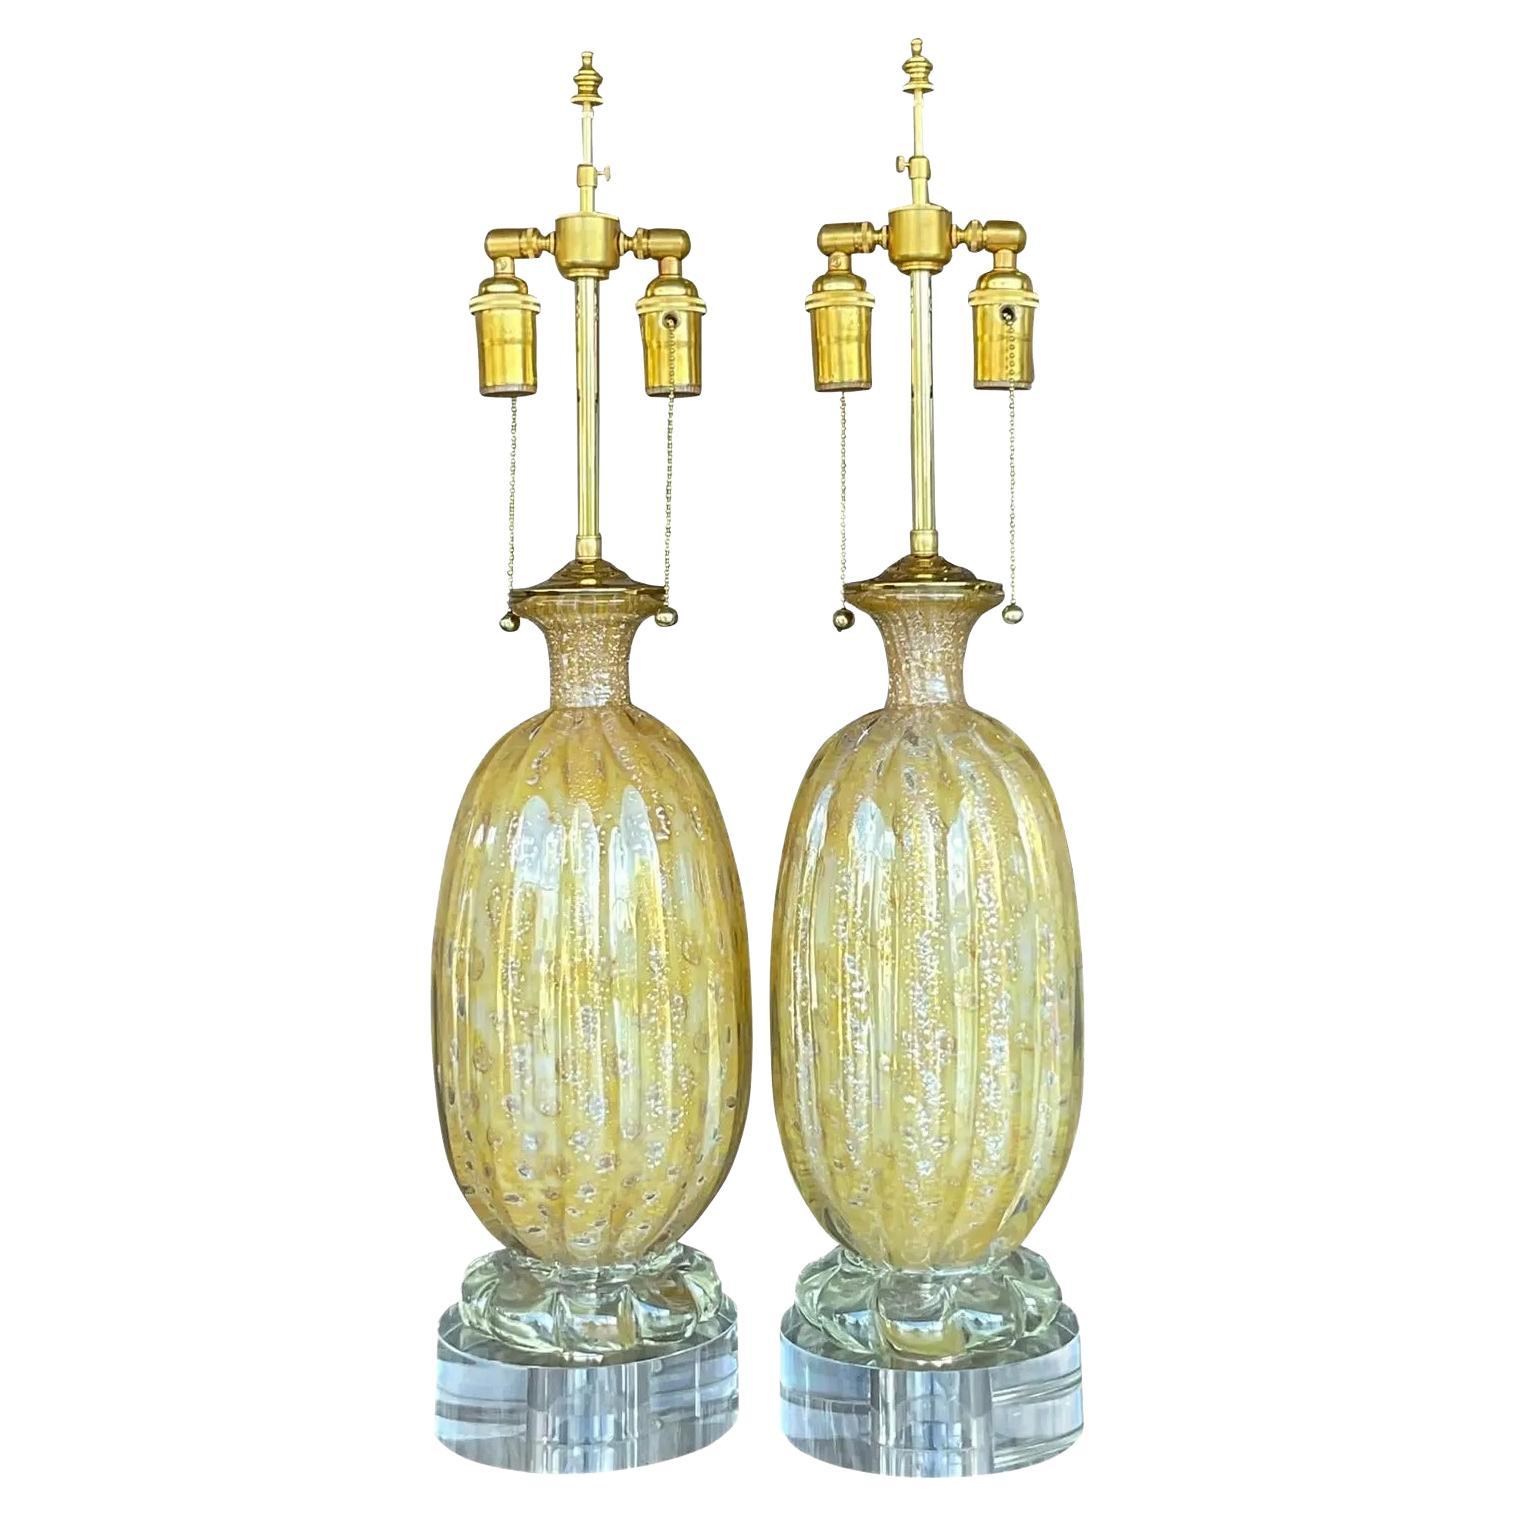 Vintage Regency Restored Italian Murano Glass Lamps - a Pair For Sale